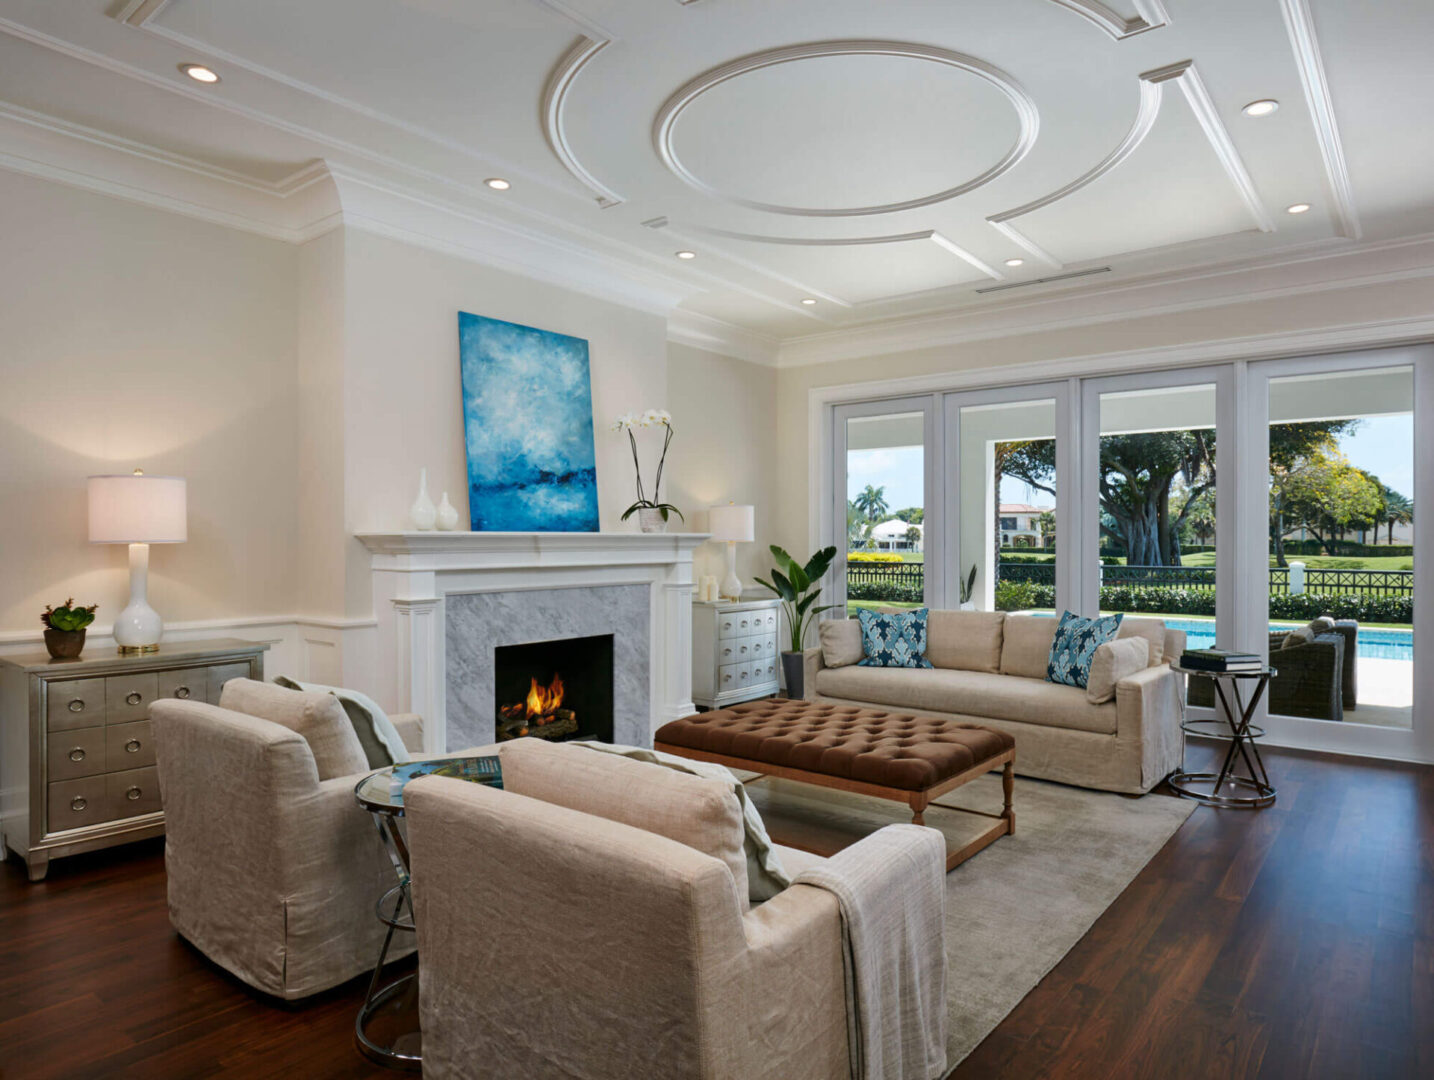 A living room with white furniture and a fireplace.